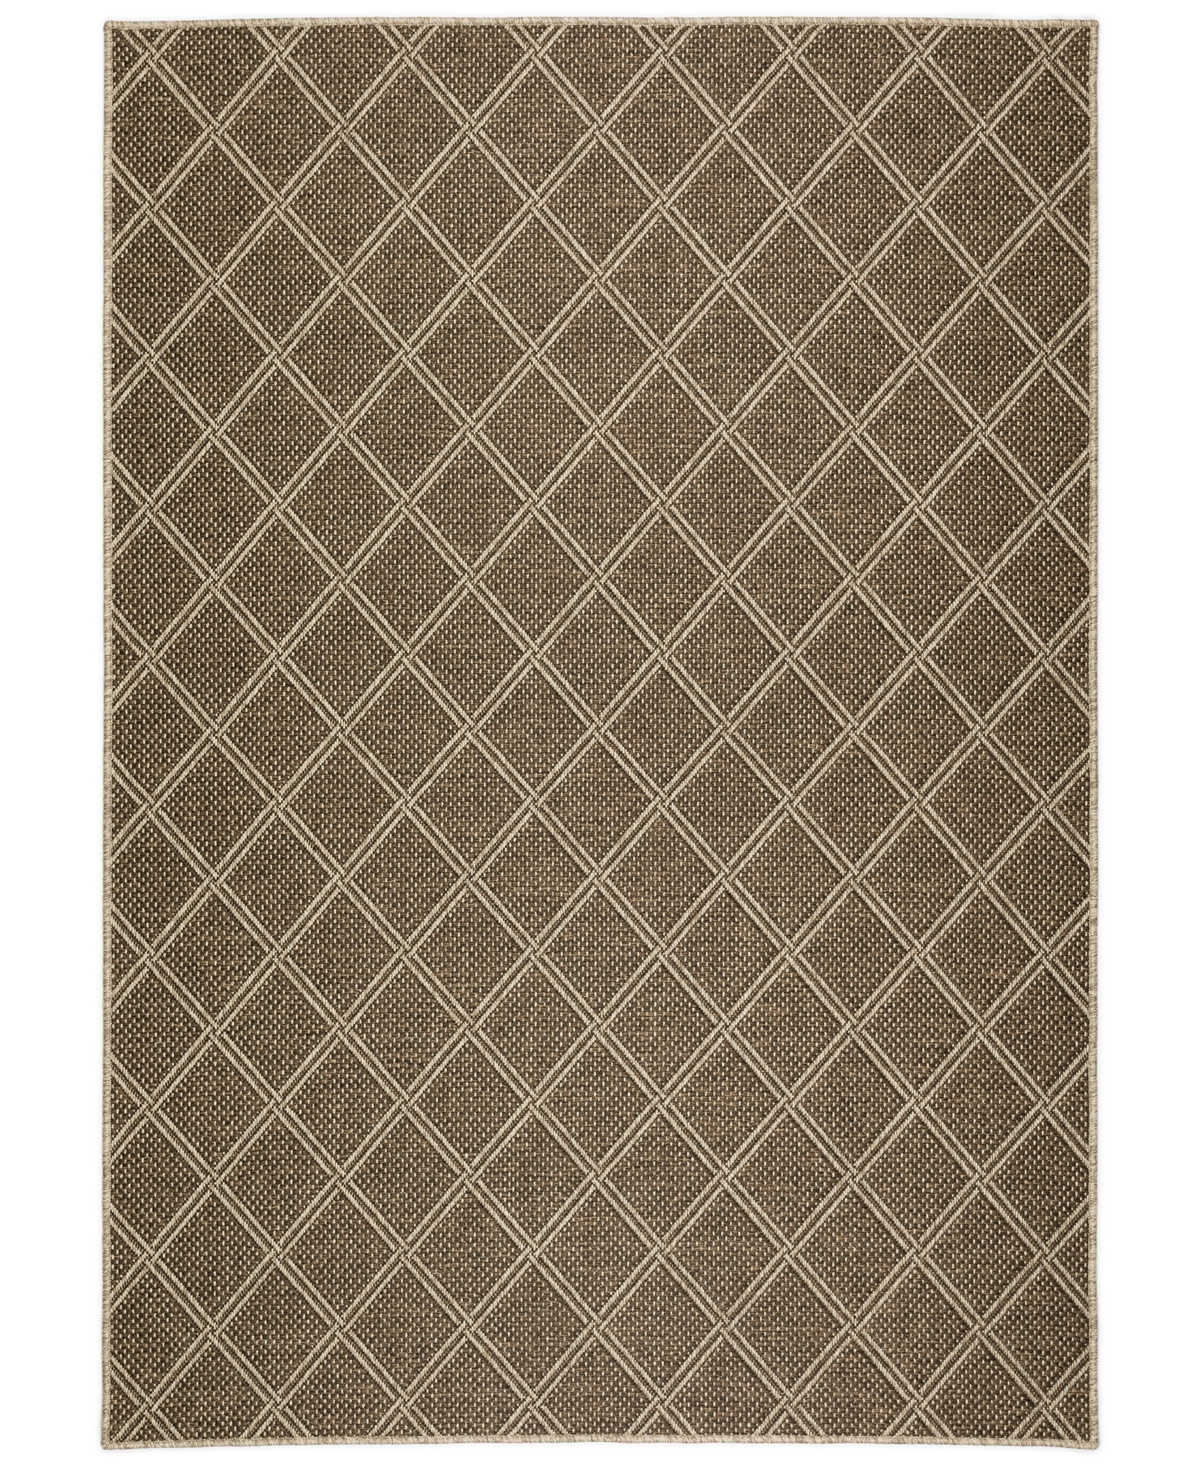 D Style Nusa Outdoor Nsa3 12' X 15' Area Rug In Chocolate